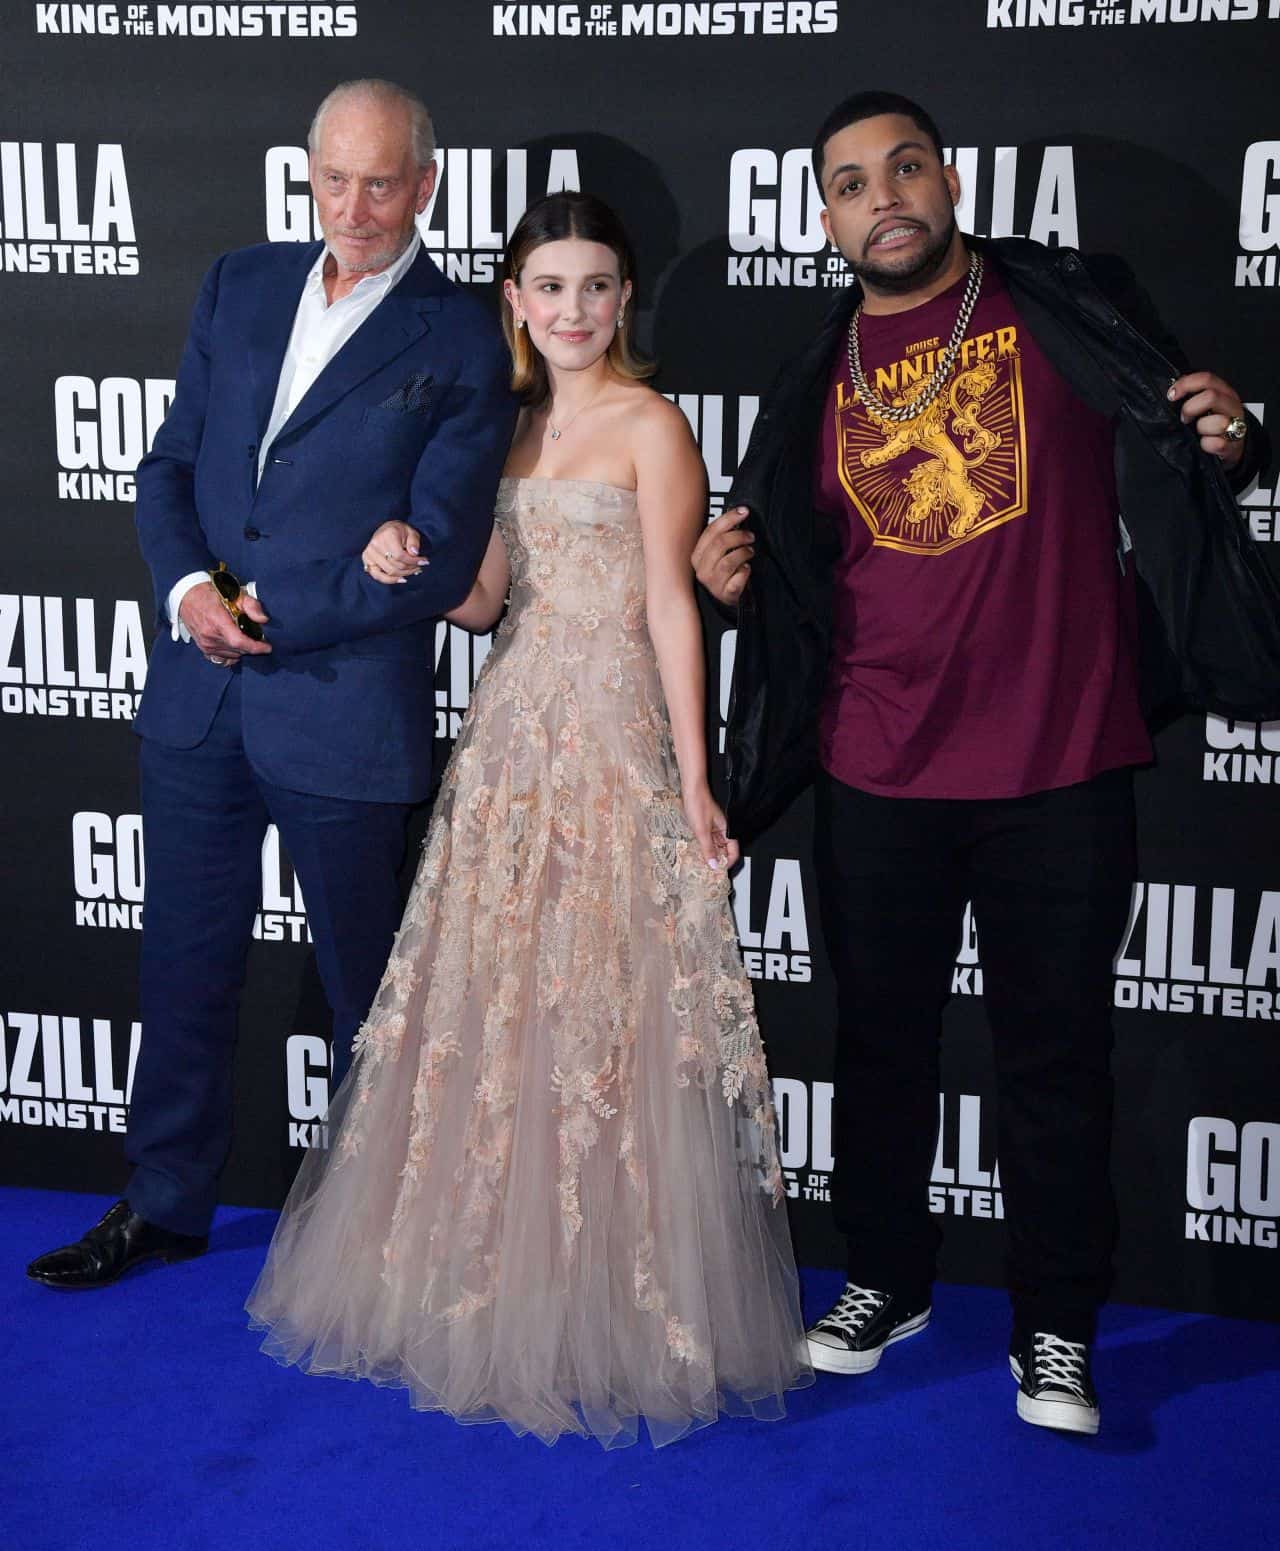 Millie Bobby Brown Attends the "Godzilla: King of the Monsters" Premiere